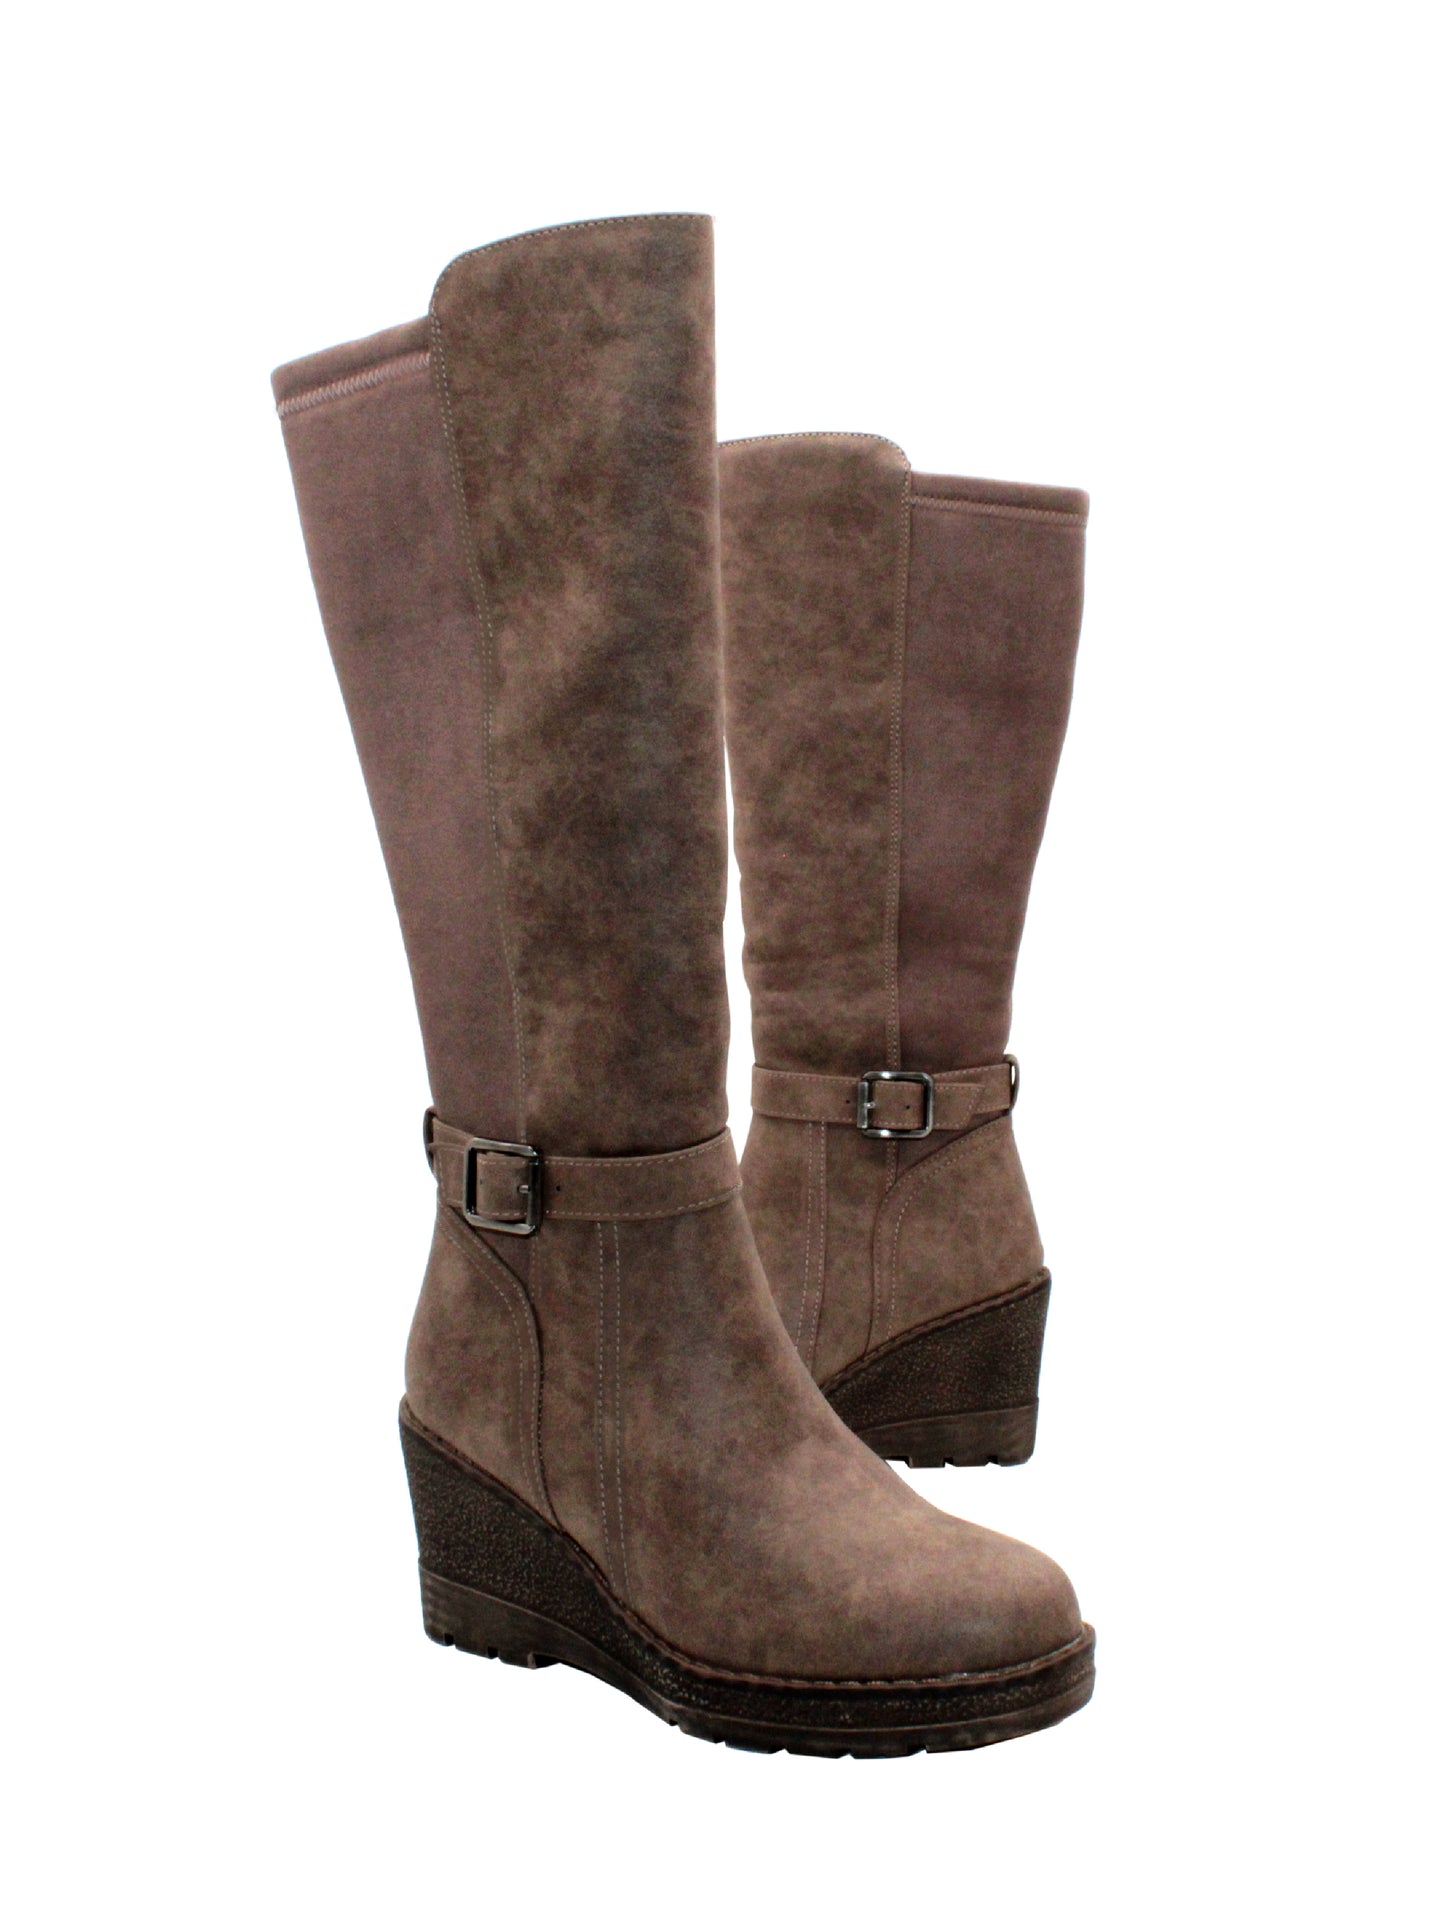 Volatile’s Cabrillo wedge boots are an ultra-versatile tall shaft boot set on a comfortable and slightly chunky lug wedge bottom